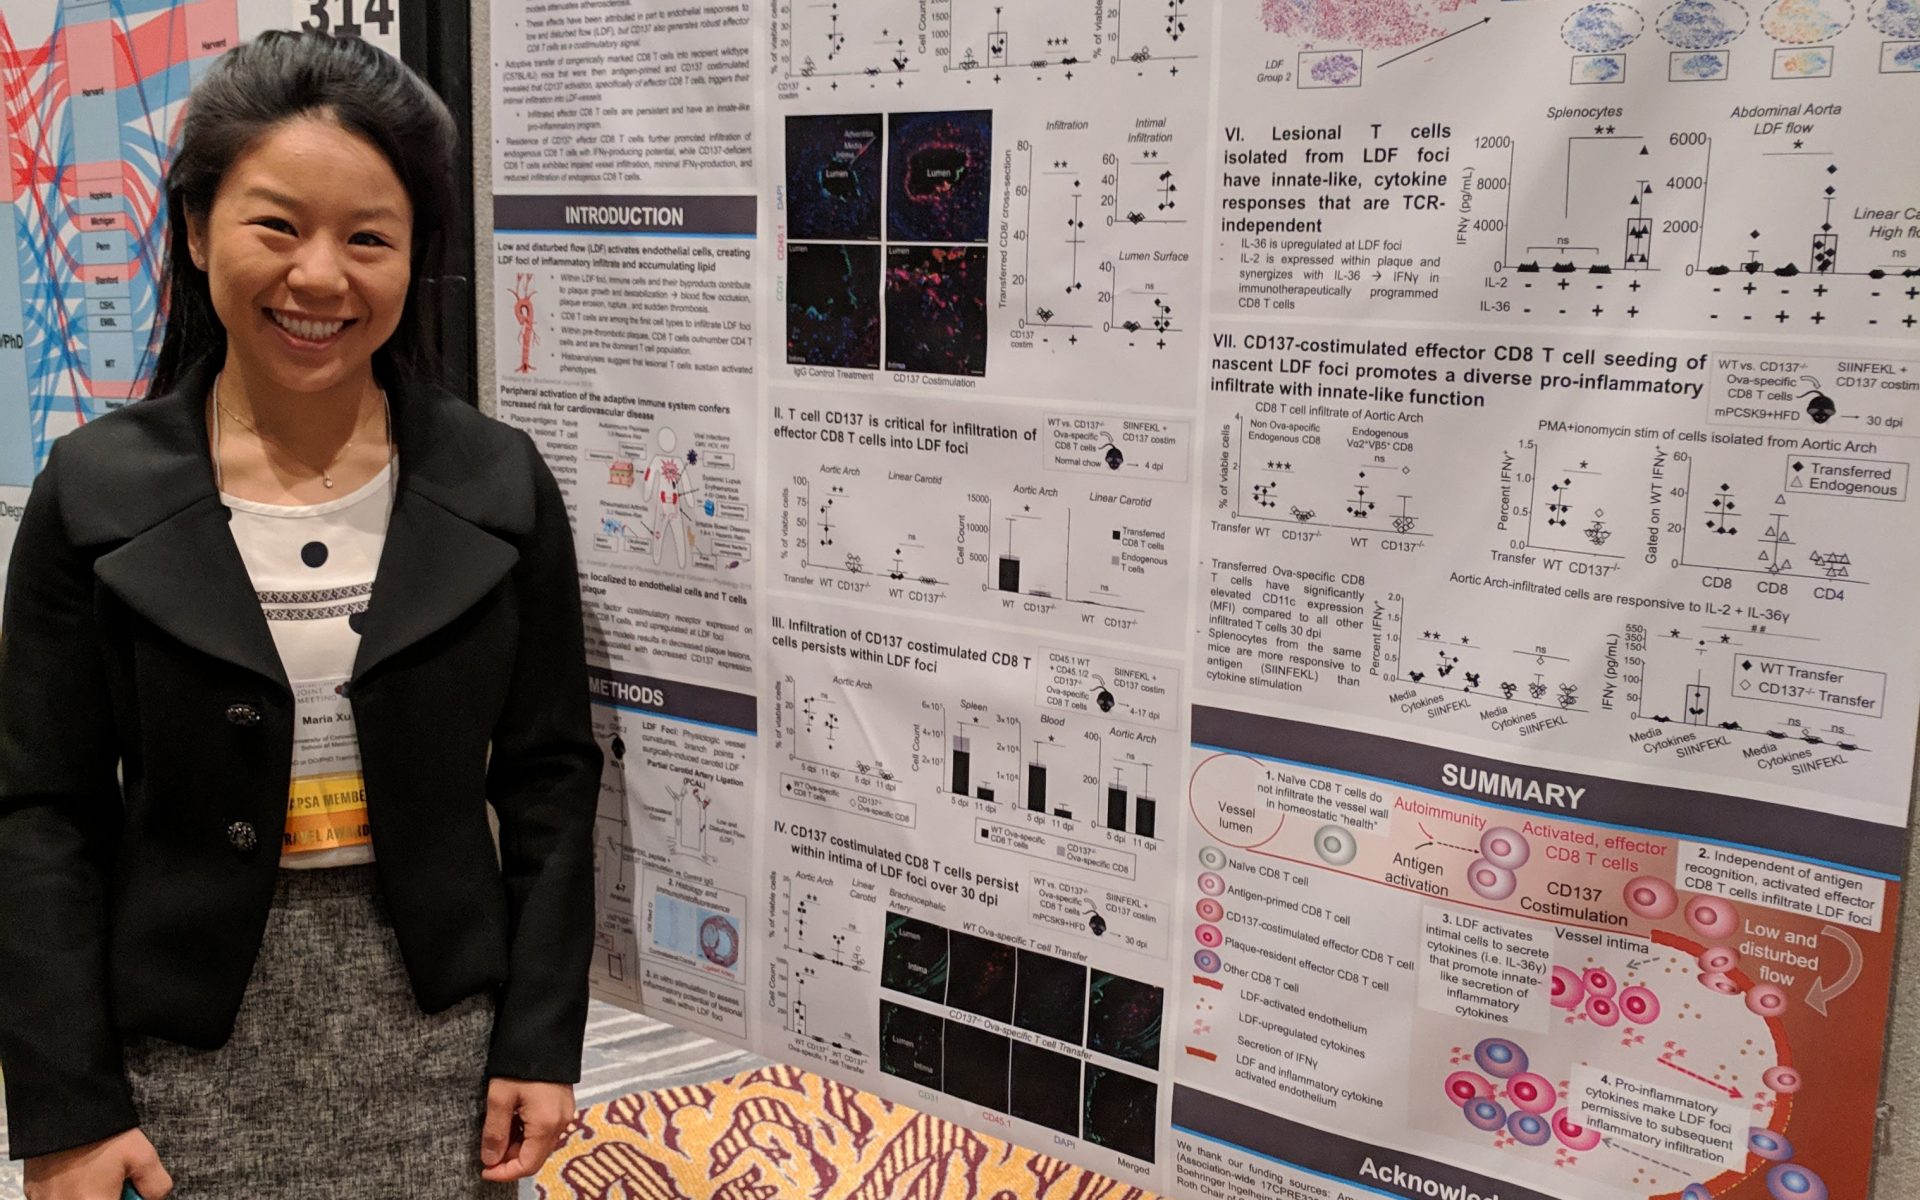 Maria Xu standing in professional attire next to her poster